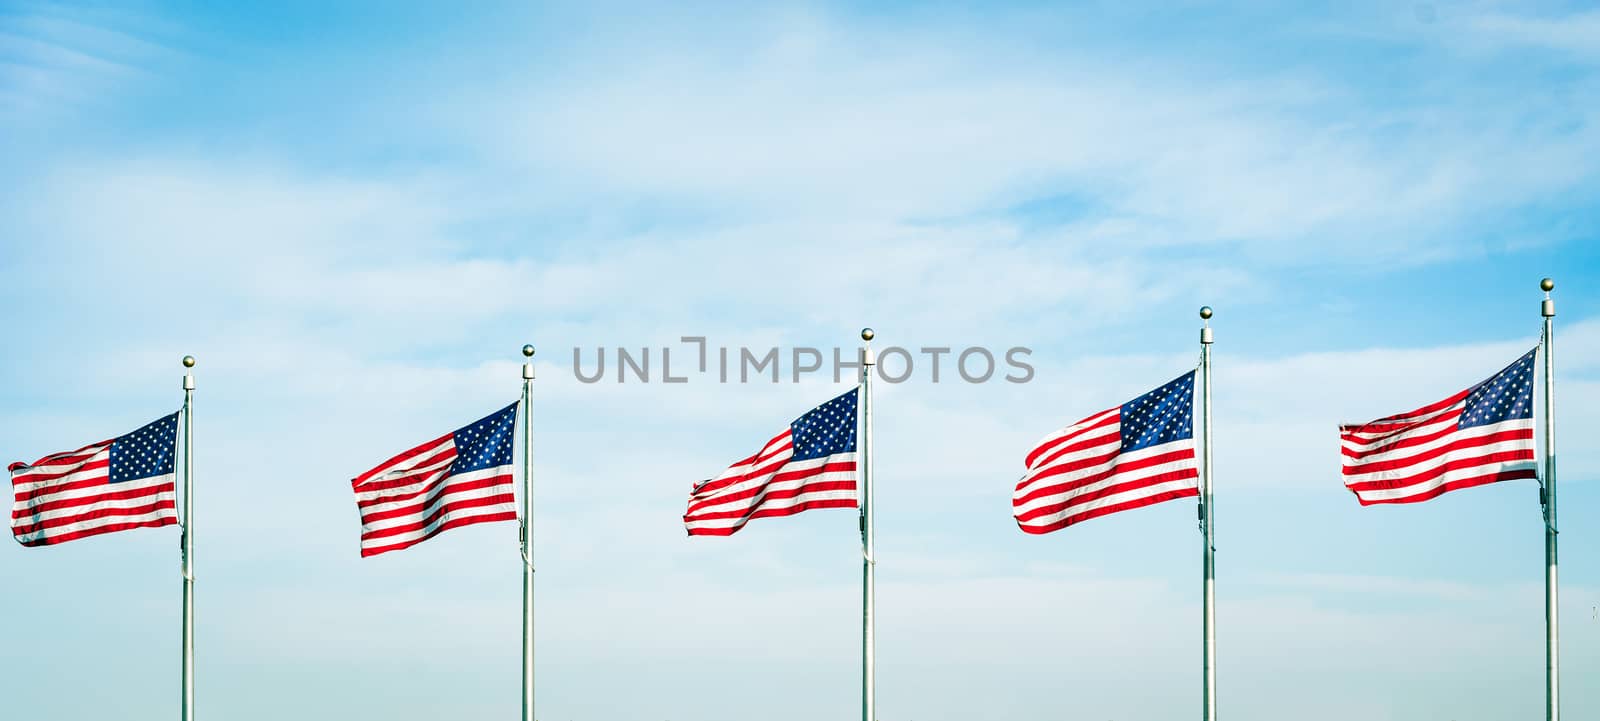 Group of five American flags waving in the wind by rarrarorro